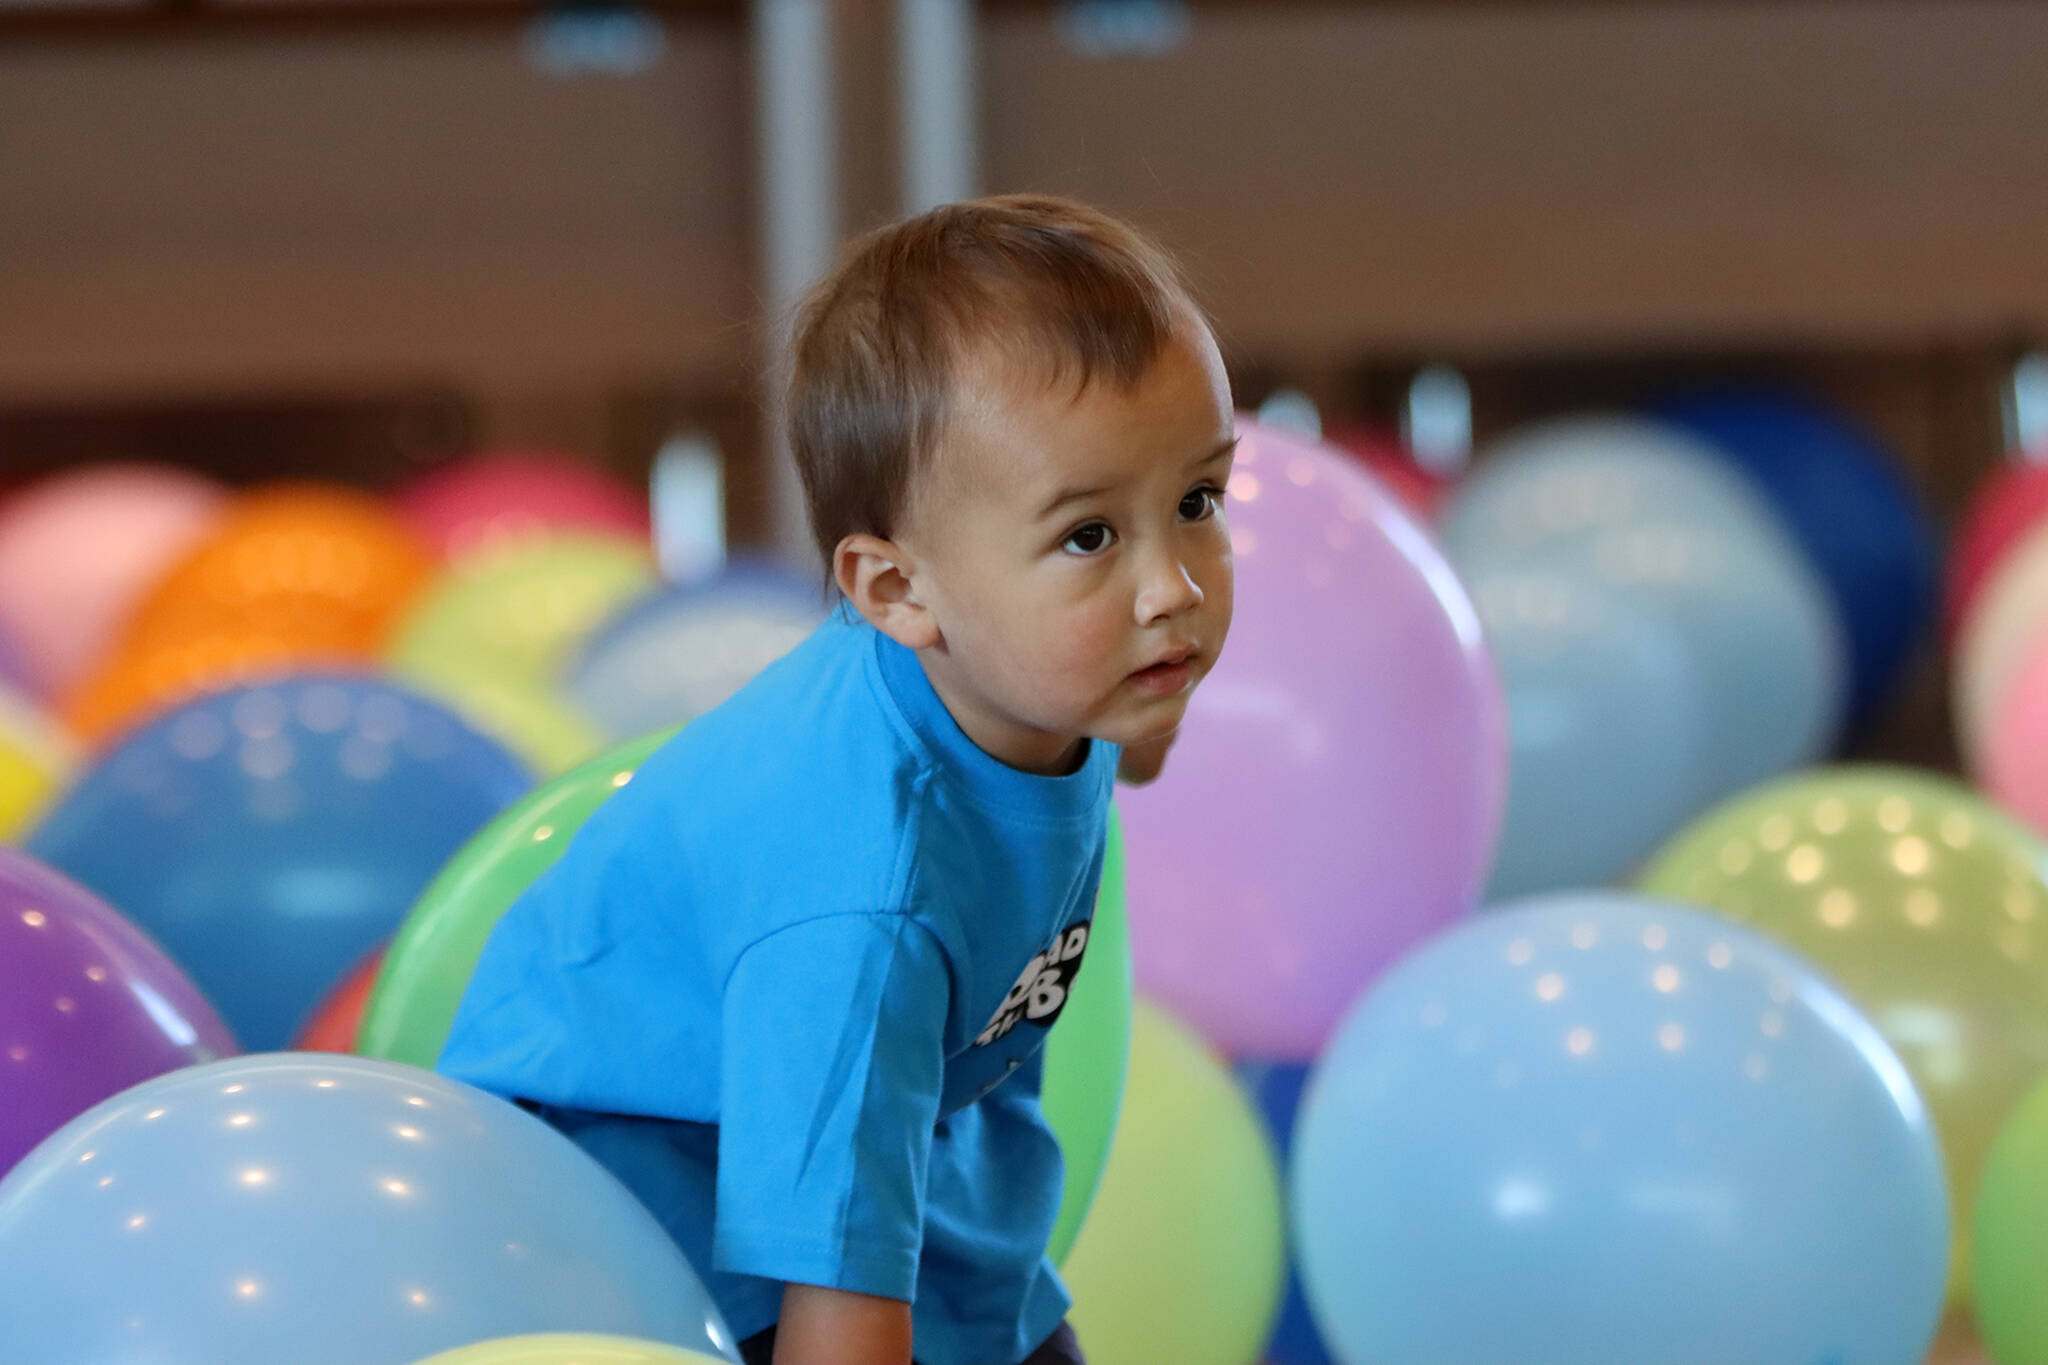 Sage Brown, 1, enjoys balloons left over from a Juneau Dental Society event before Drag Storytime at the Mendenhall Valley Public Library. (Ben Hohenstatt / Juneau Empire)